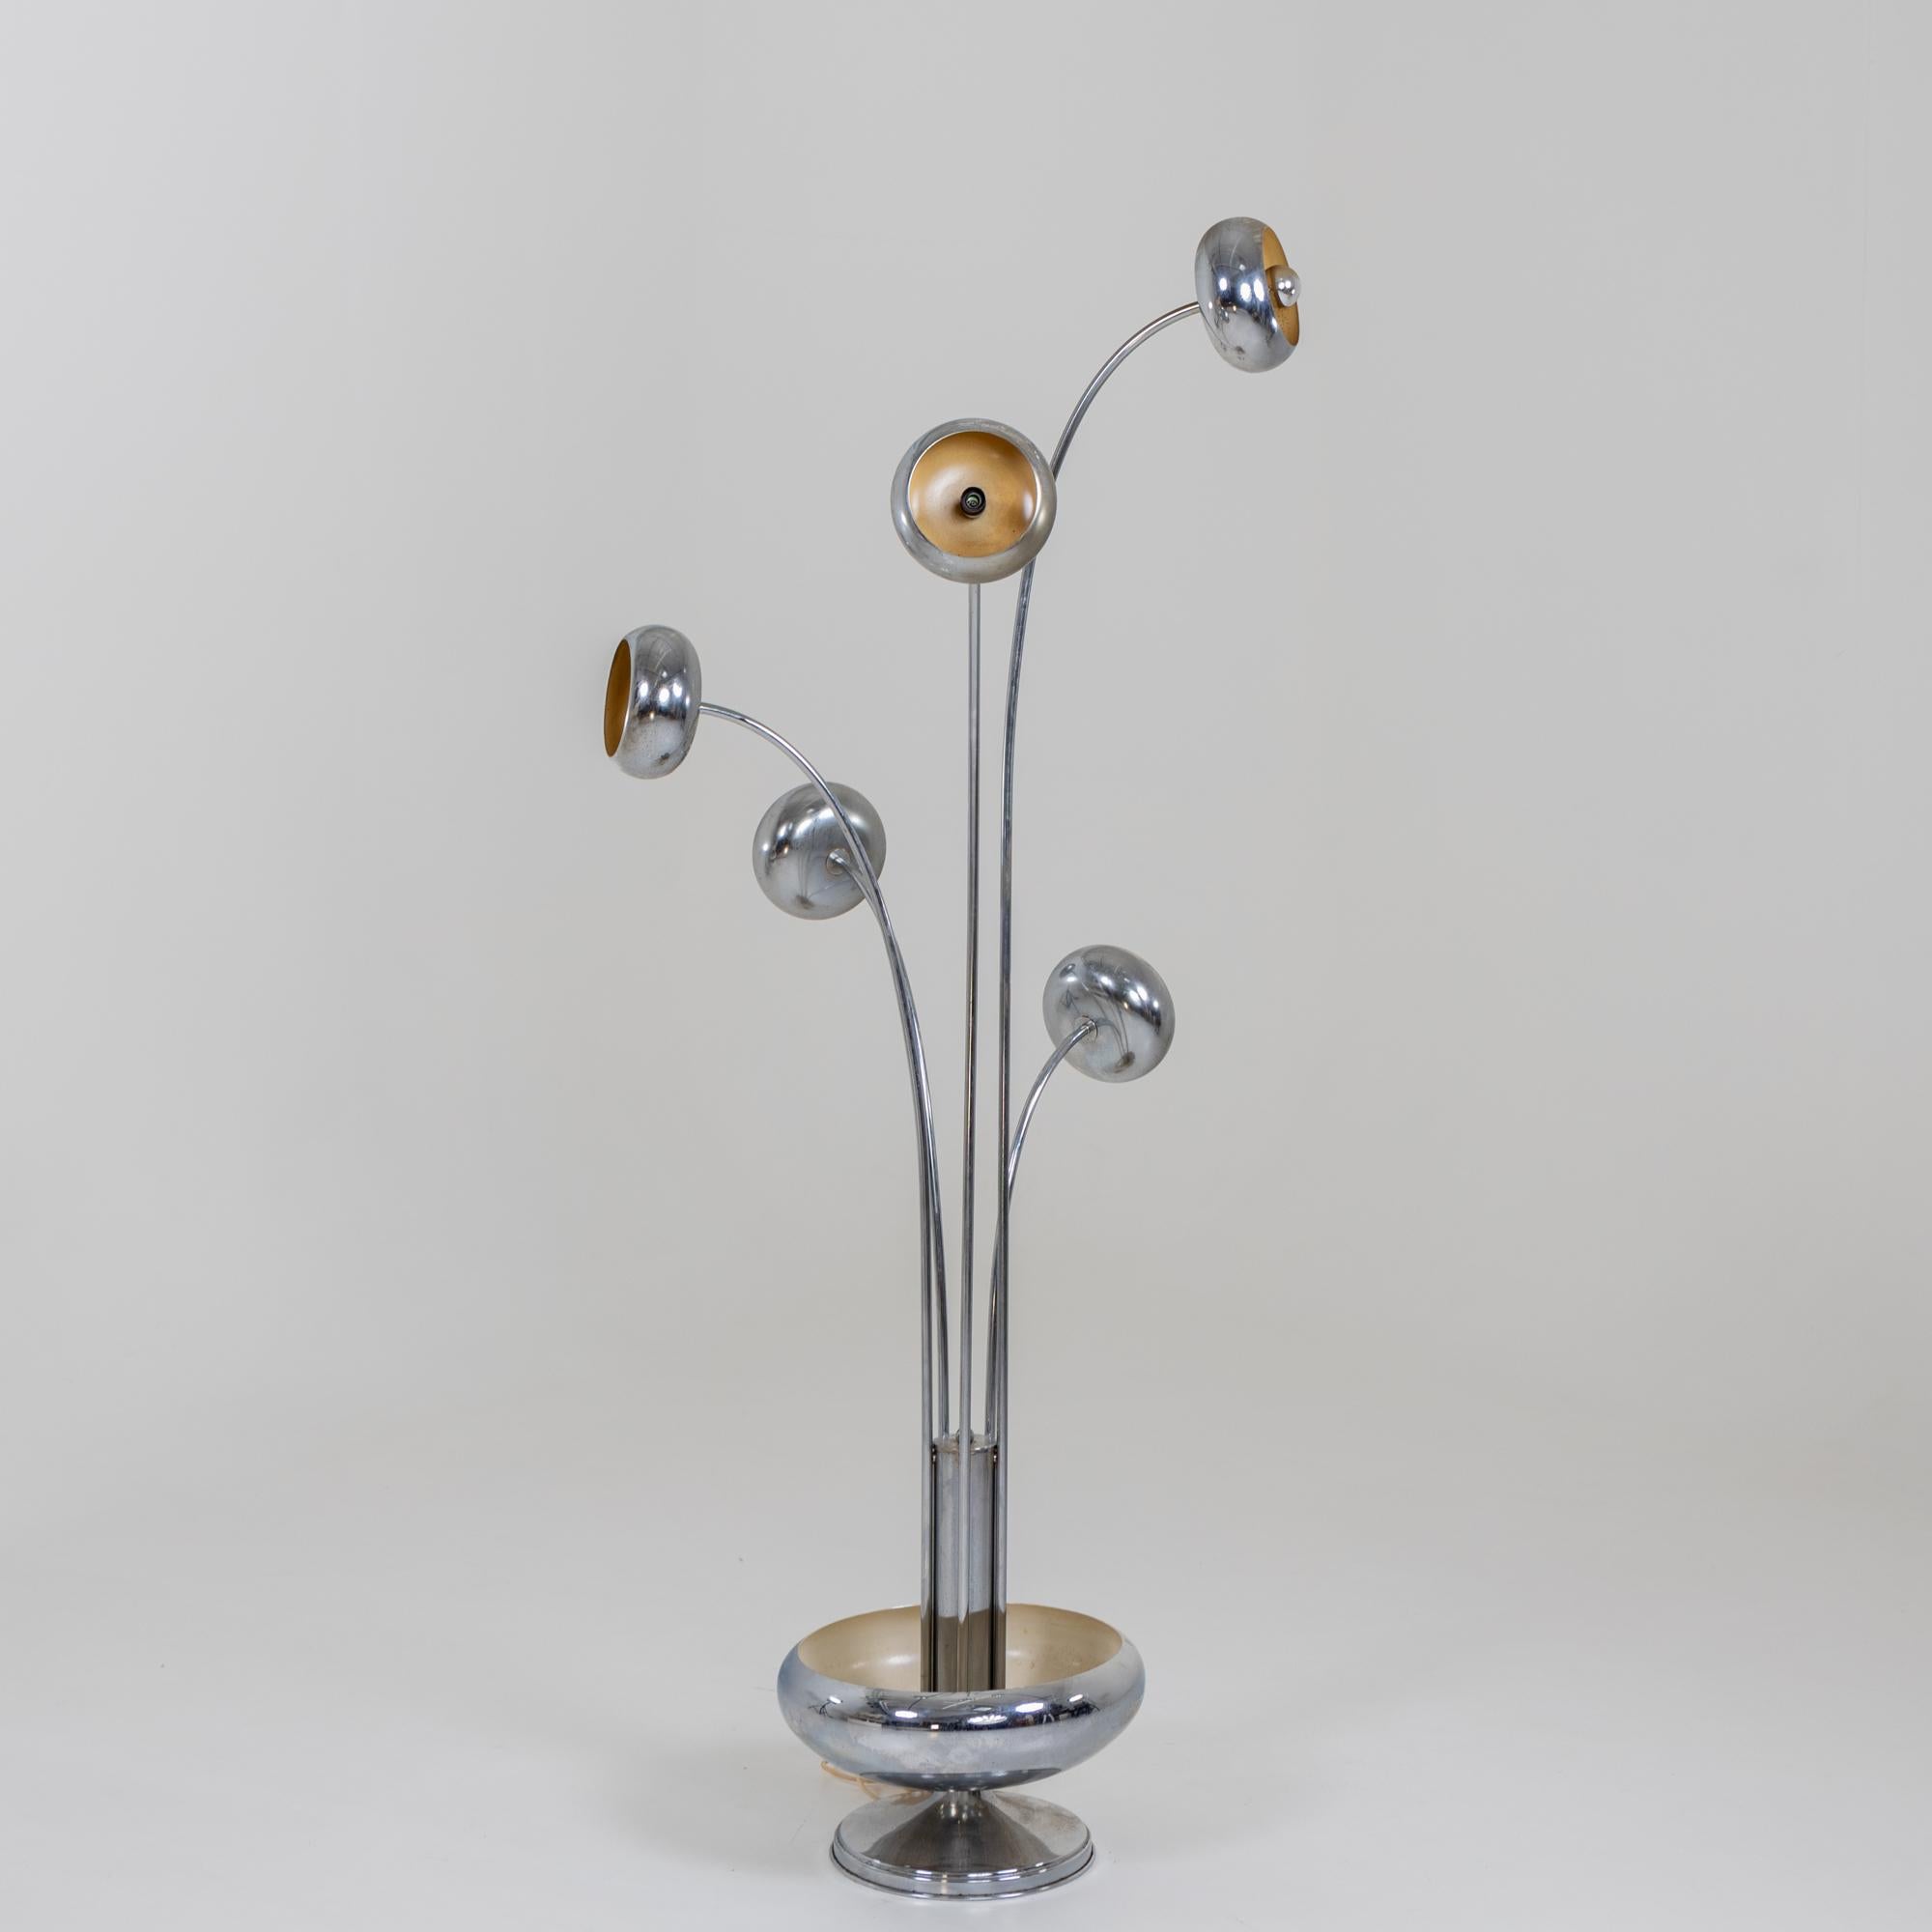 Floor lamp with vase-shaped base and five arms with round lampshades, reminiscent of a stylised flower bouquet.